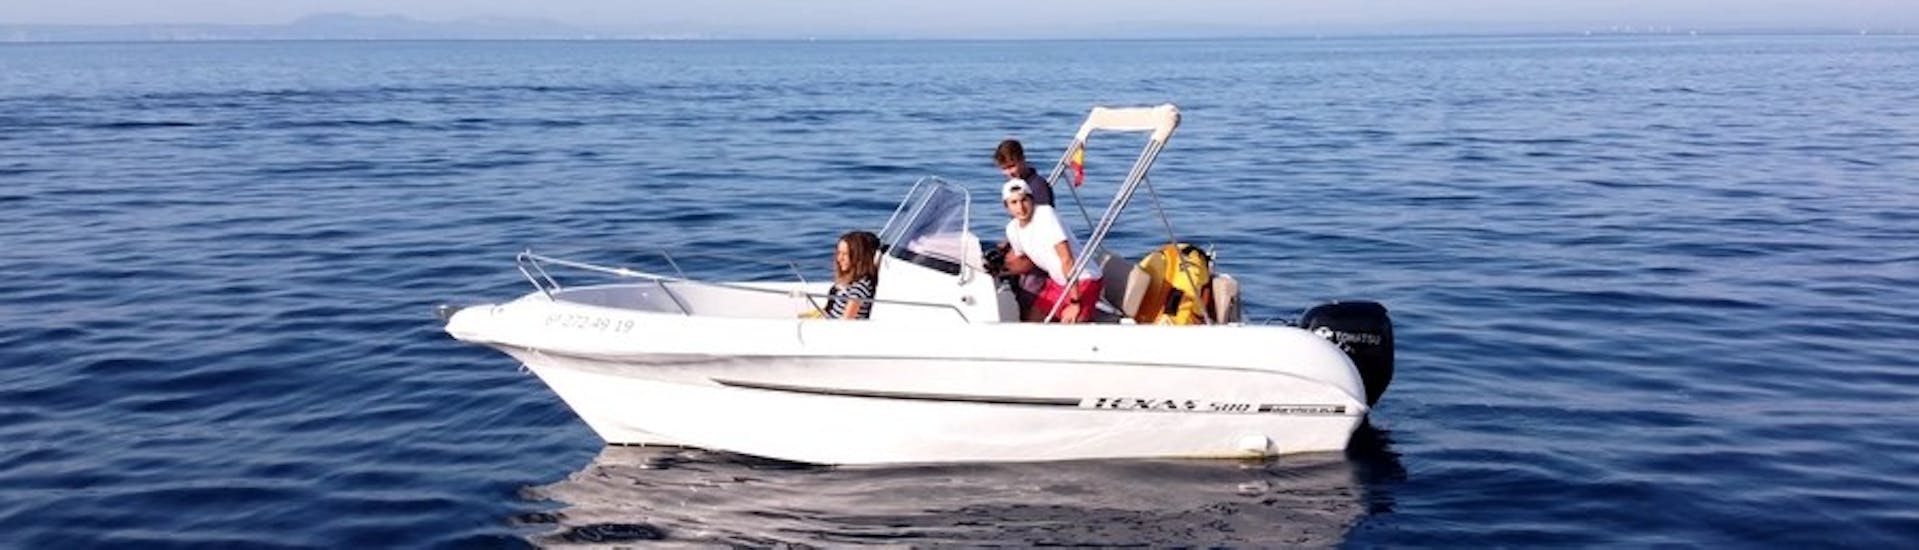 The modern TEXAS 580 motorboat with a group of participants having fun while cruising on the turquoise waters of the bay of roses during a boat rental in Costa Brava for up to 6 people with licence with Maxi Boats.